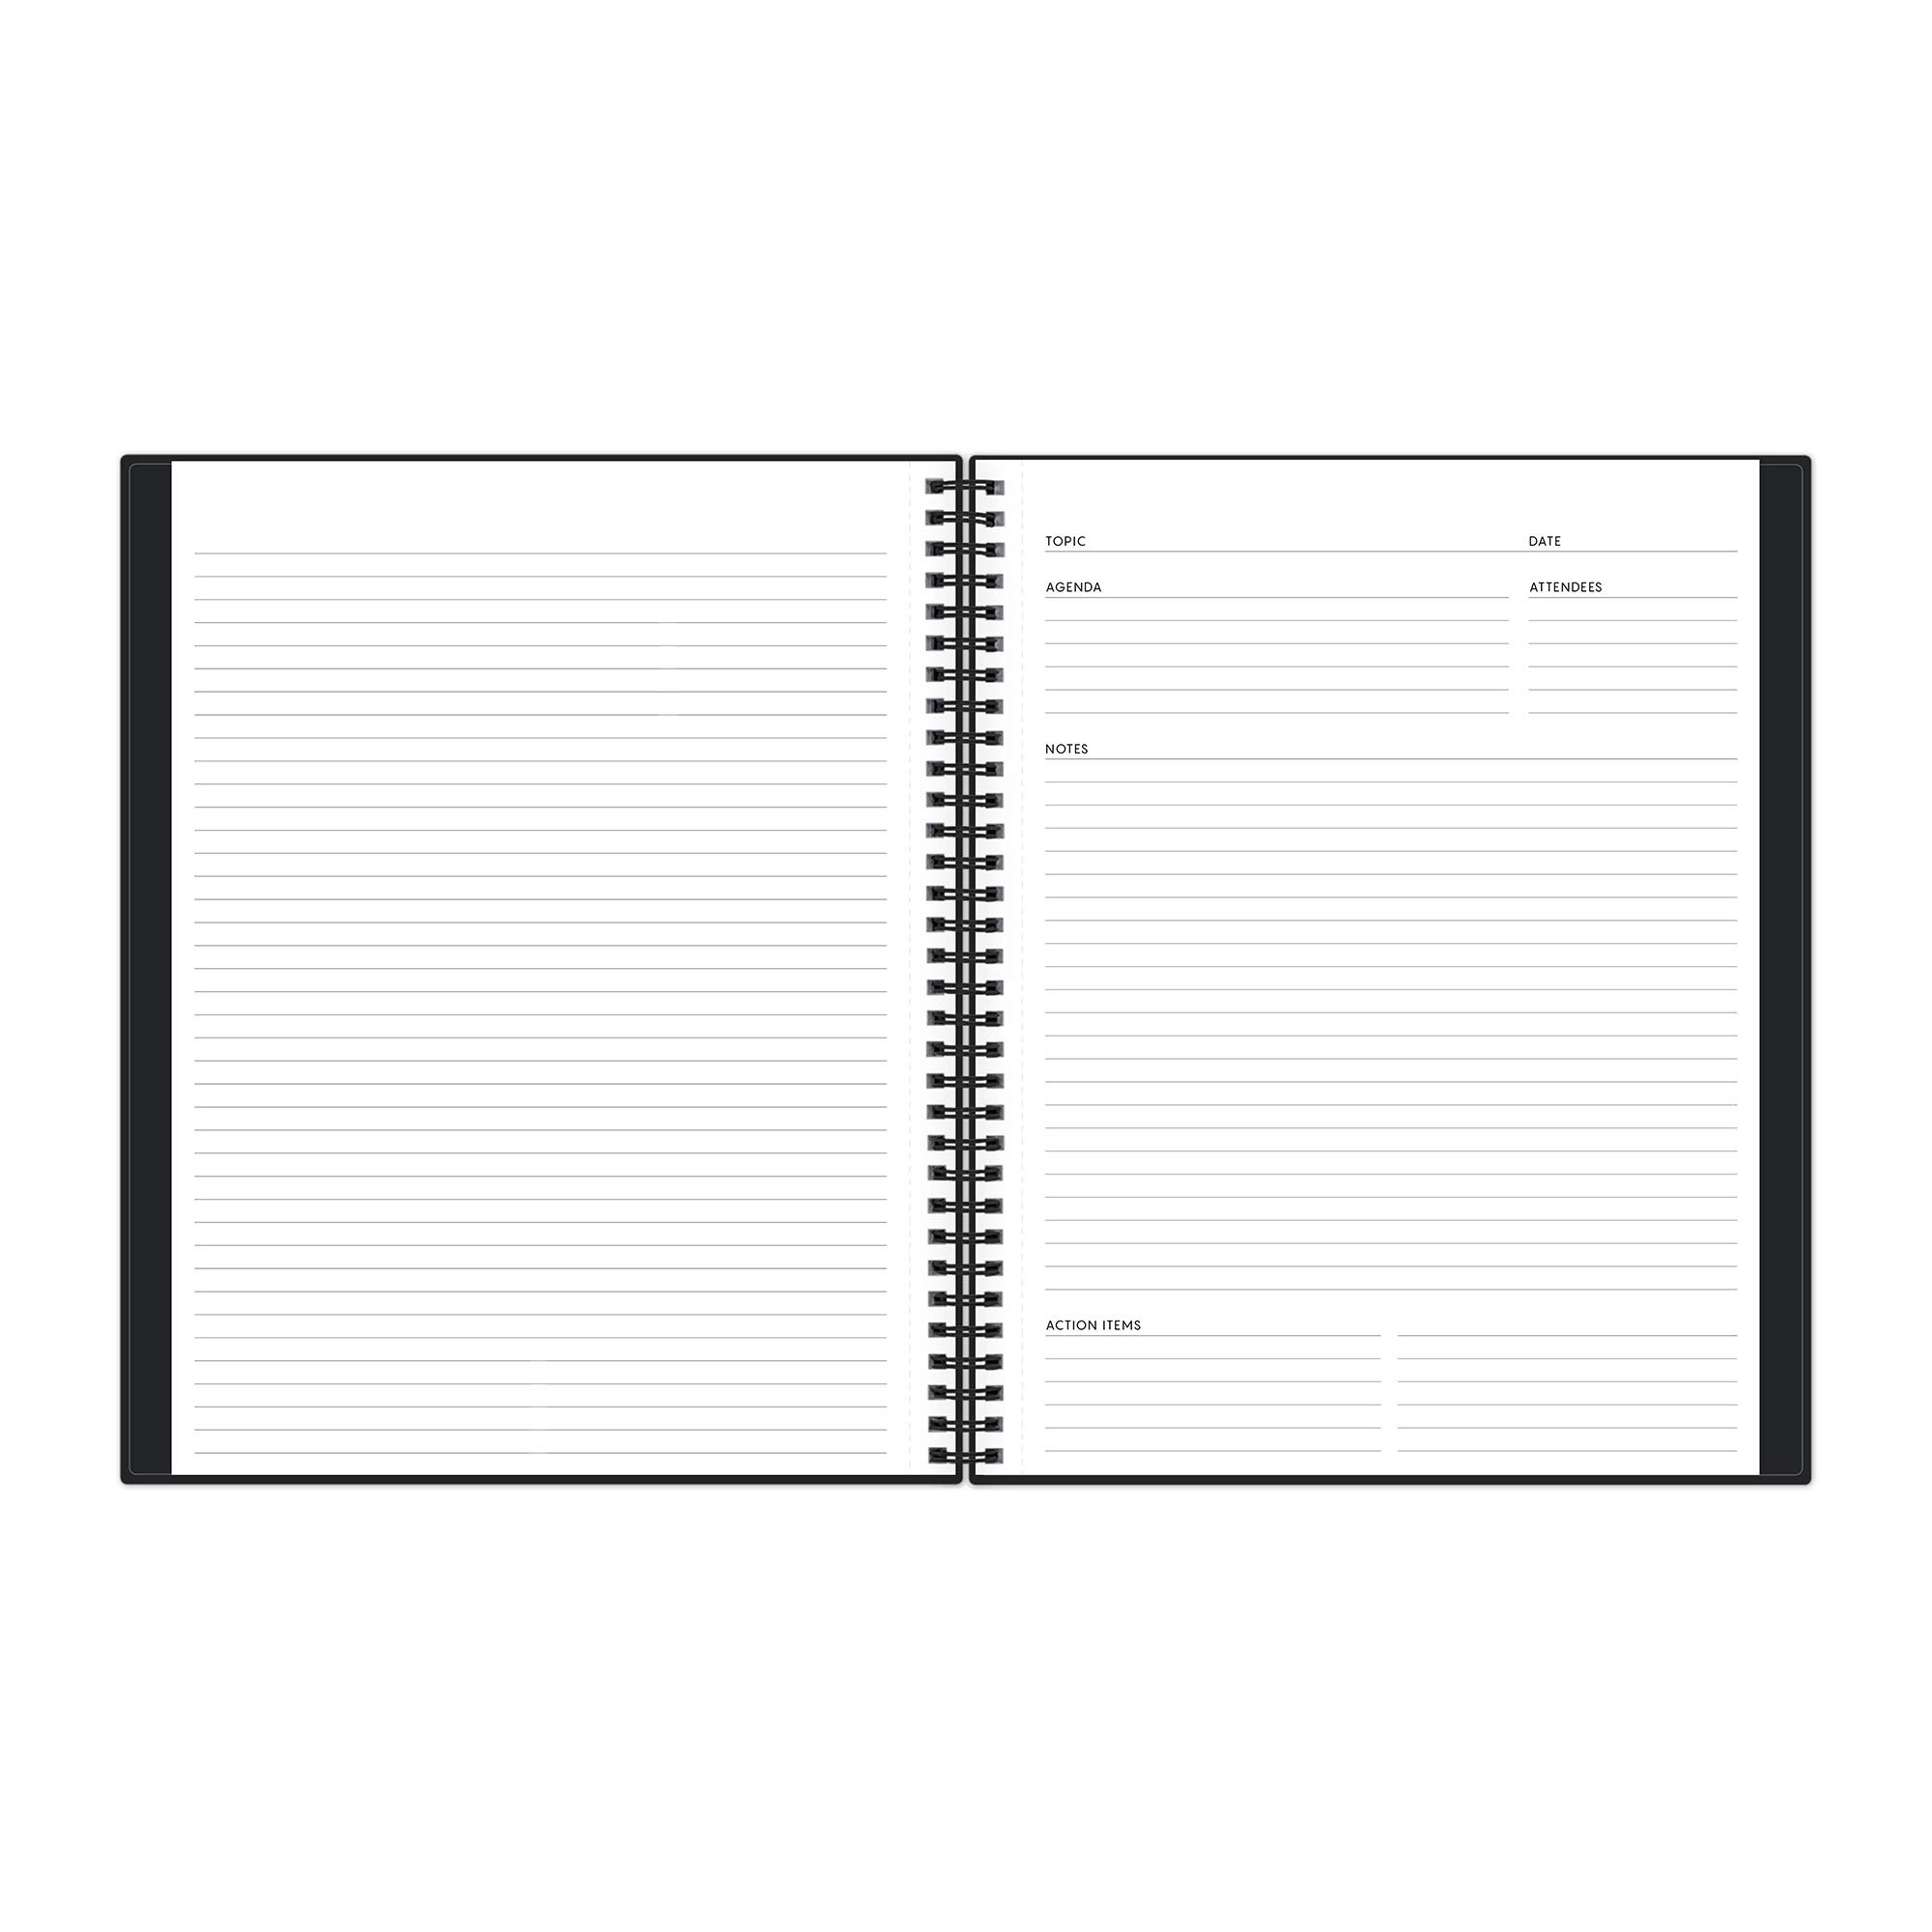 Blue Sky Aligned Notes Professional Business Notebook, Flexible Cover, Twin-Wire Binding, Perforated Pages, 8.5" x 11", Black